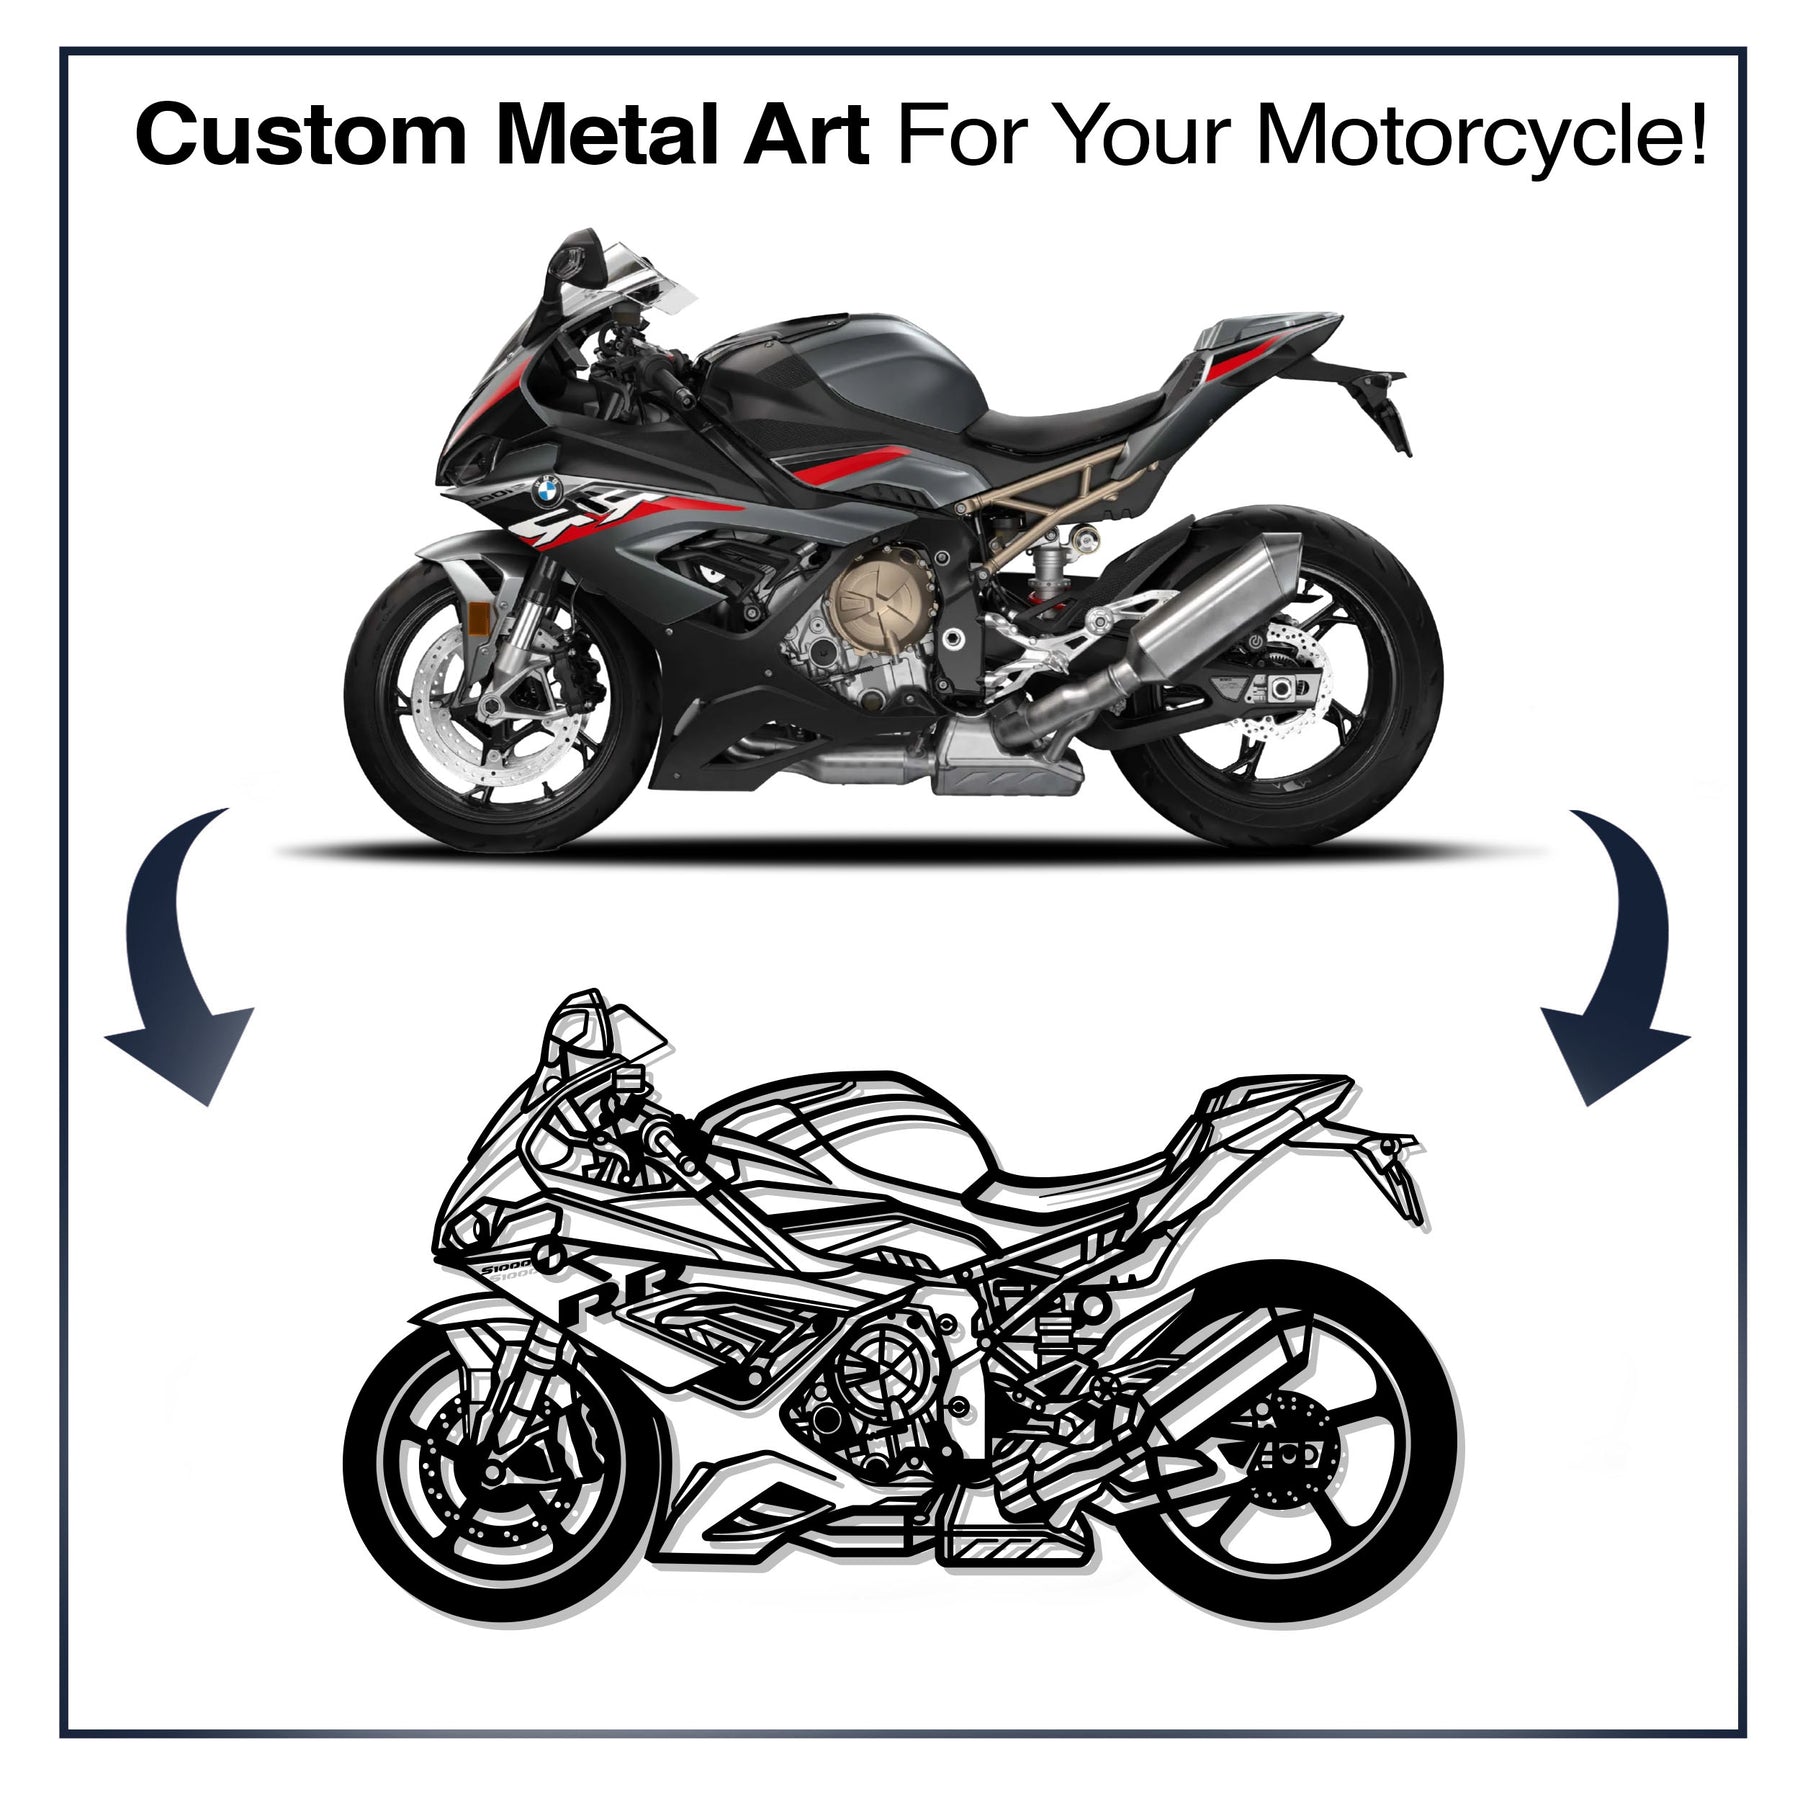 Your Personalized Motorcycle Metal Wall Art - MT1114